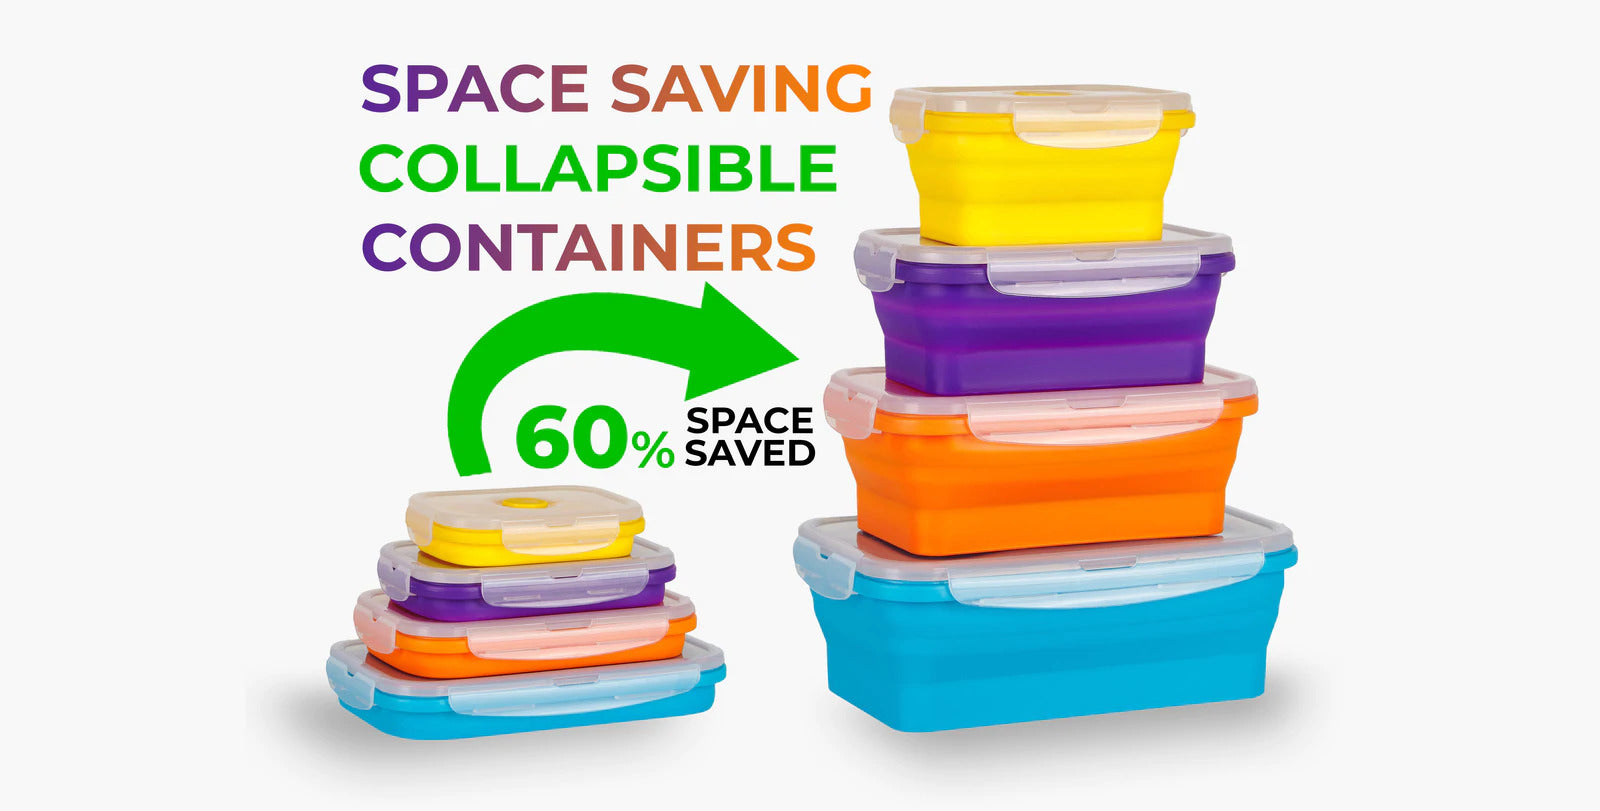 FLAT STACKS 4 PC. RECTANGLE CONTAINER SET – Ocean Sales USA